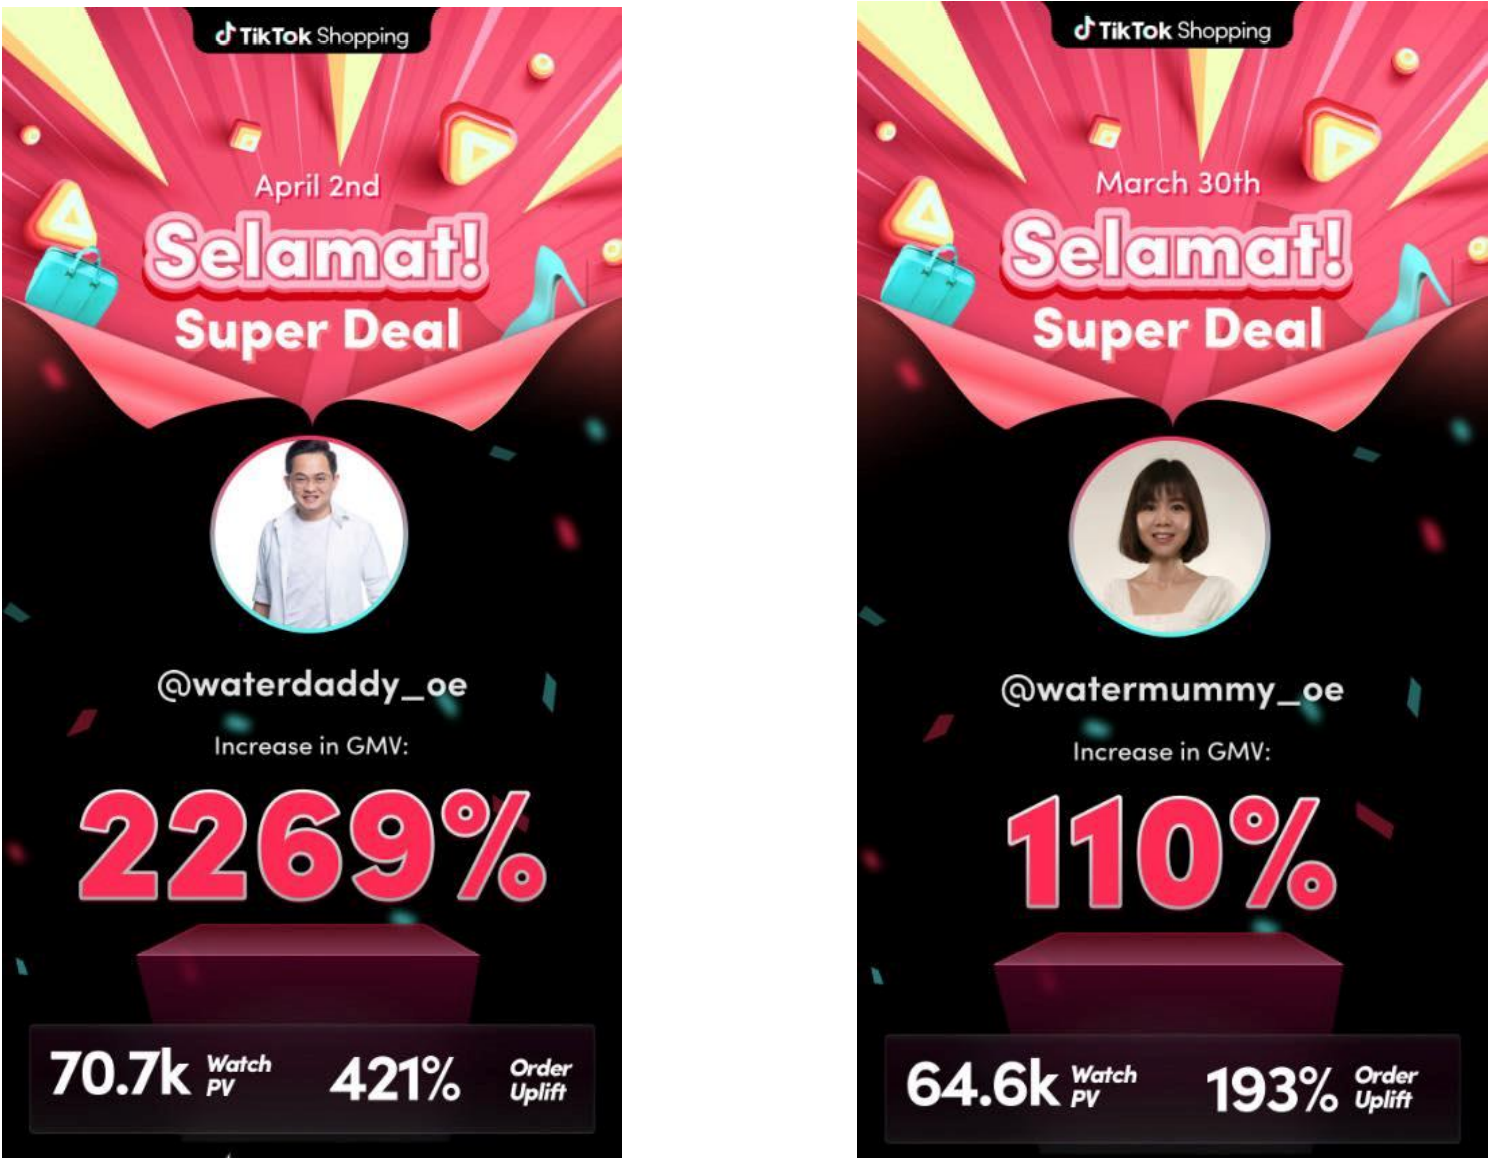 Two of the top sellers involved in Nuffnang's Malaysian TikTok Shop pilot run earlier this year 